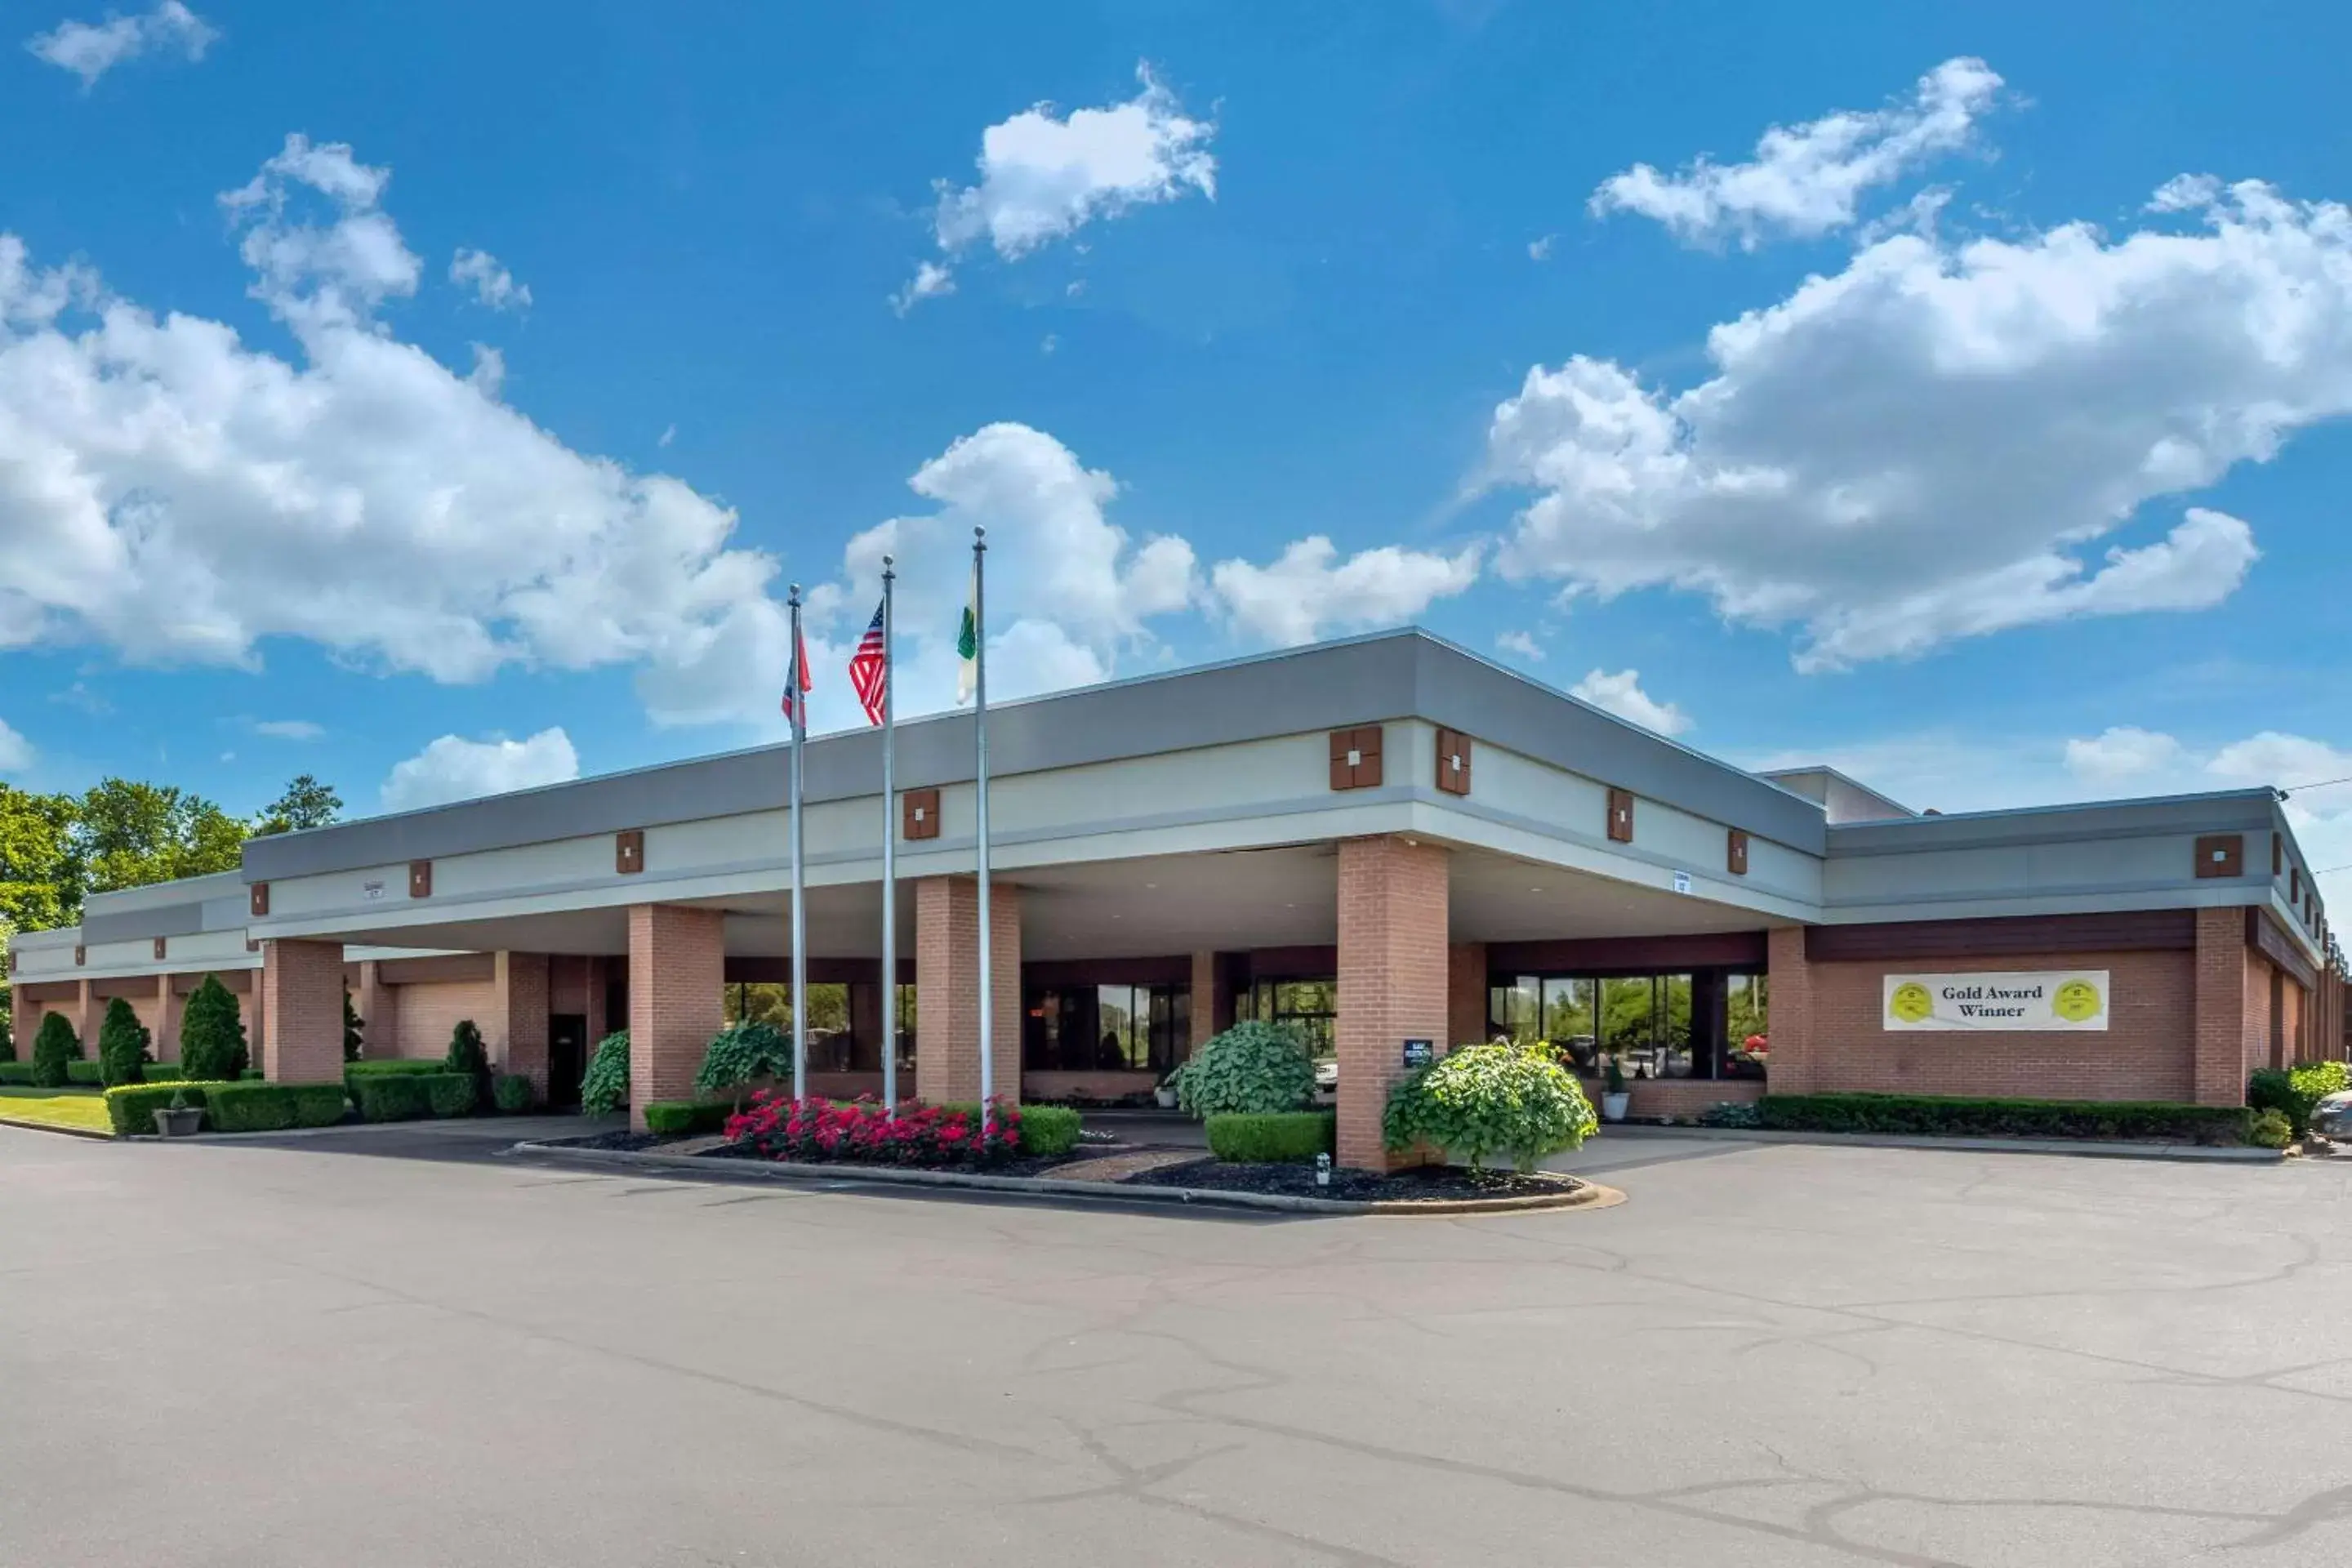 Property Building in Quality Inn Exit 4 Clarksville